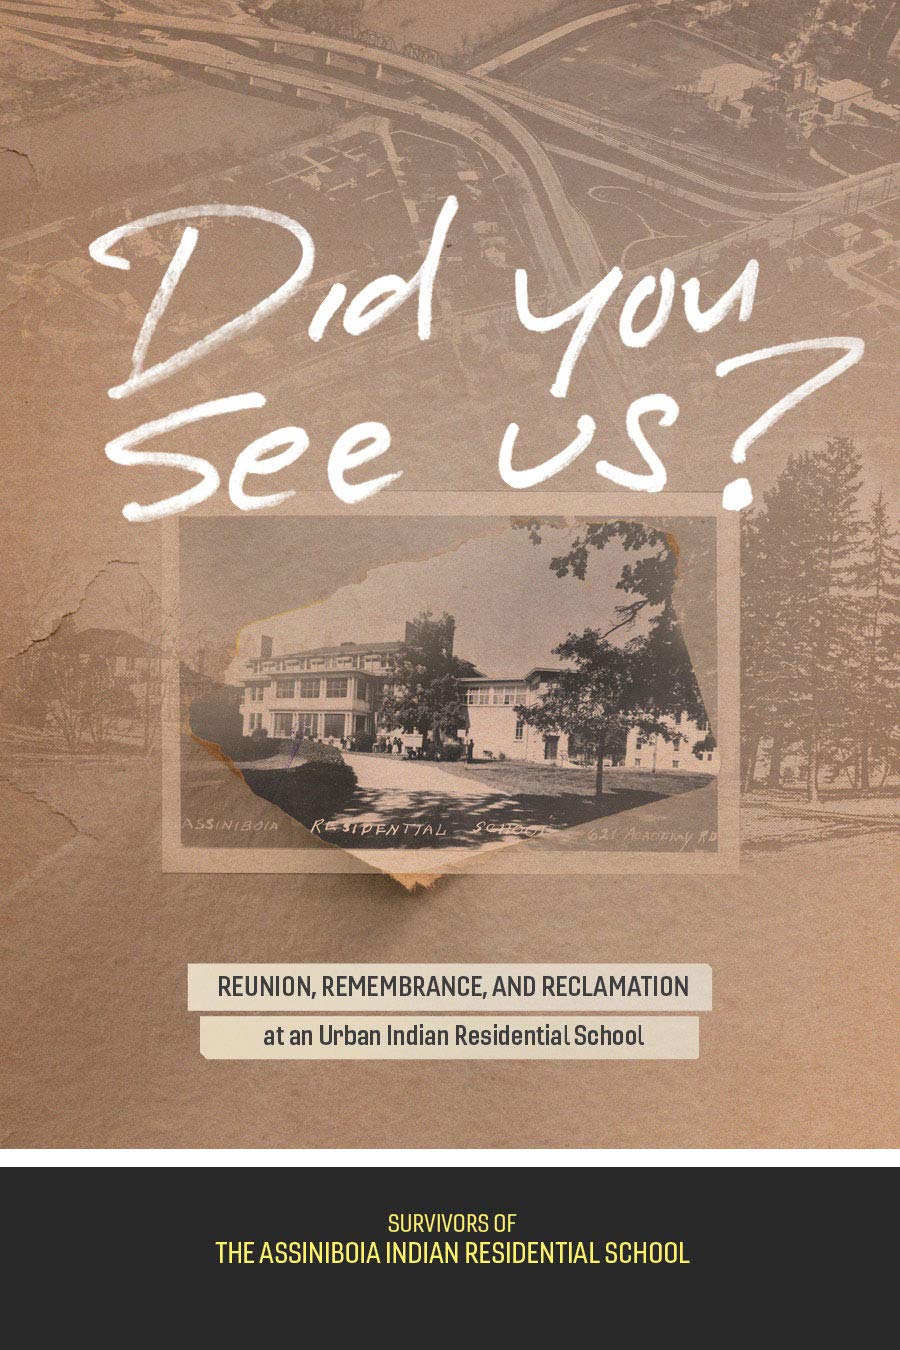 Did You See Us?: Reunion, Remembrance, and Reclamation at an Urban Indian Residential School [Survivors of the Assiniboia Indian Residential School]